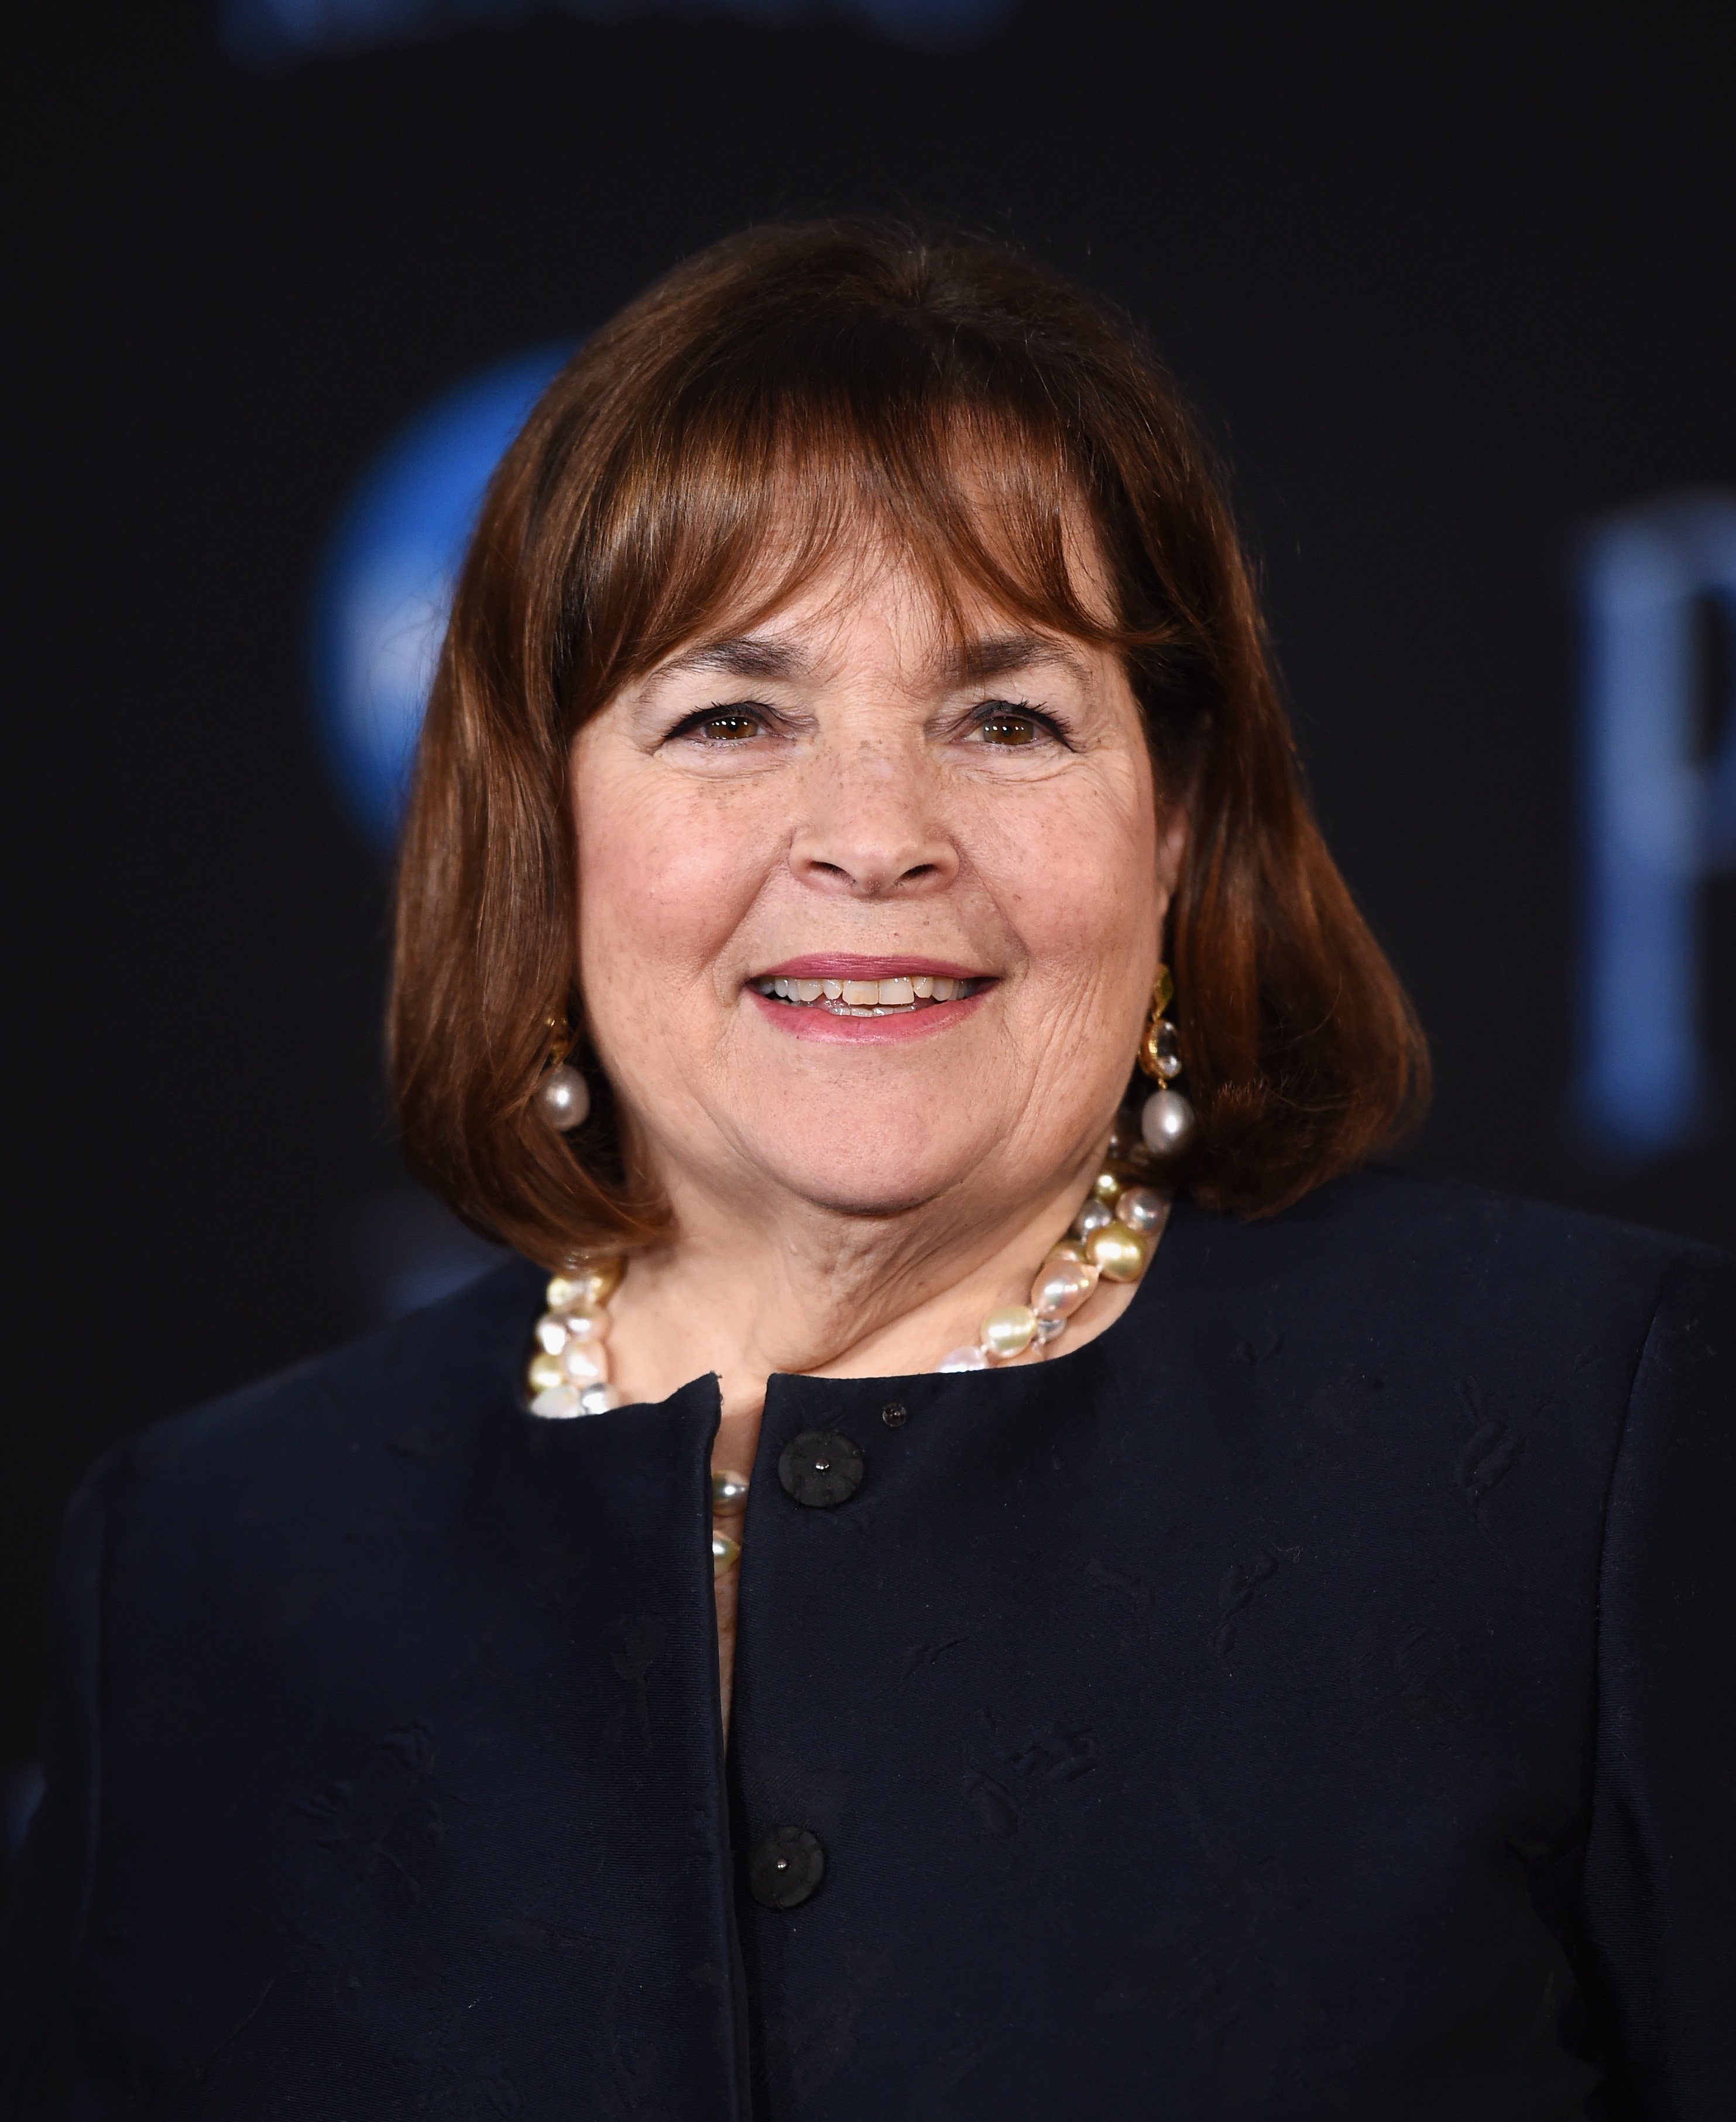 Ina Garten arrives at the premiere of Disney's "Mary Poppins Returns" at the El Capitan Theatre on November 29, 2018 in Los Angeles, California | Source: Getty Images